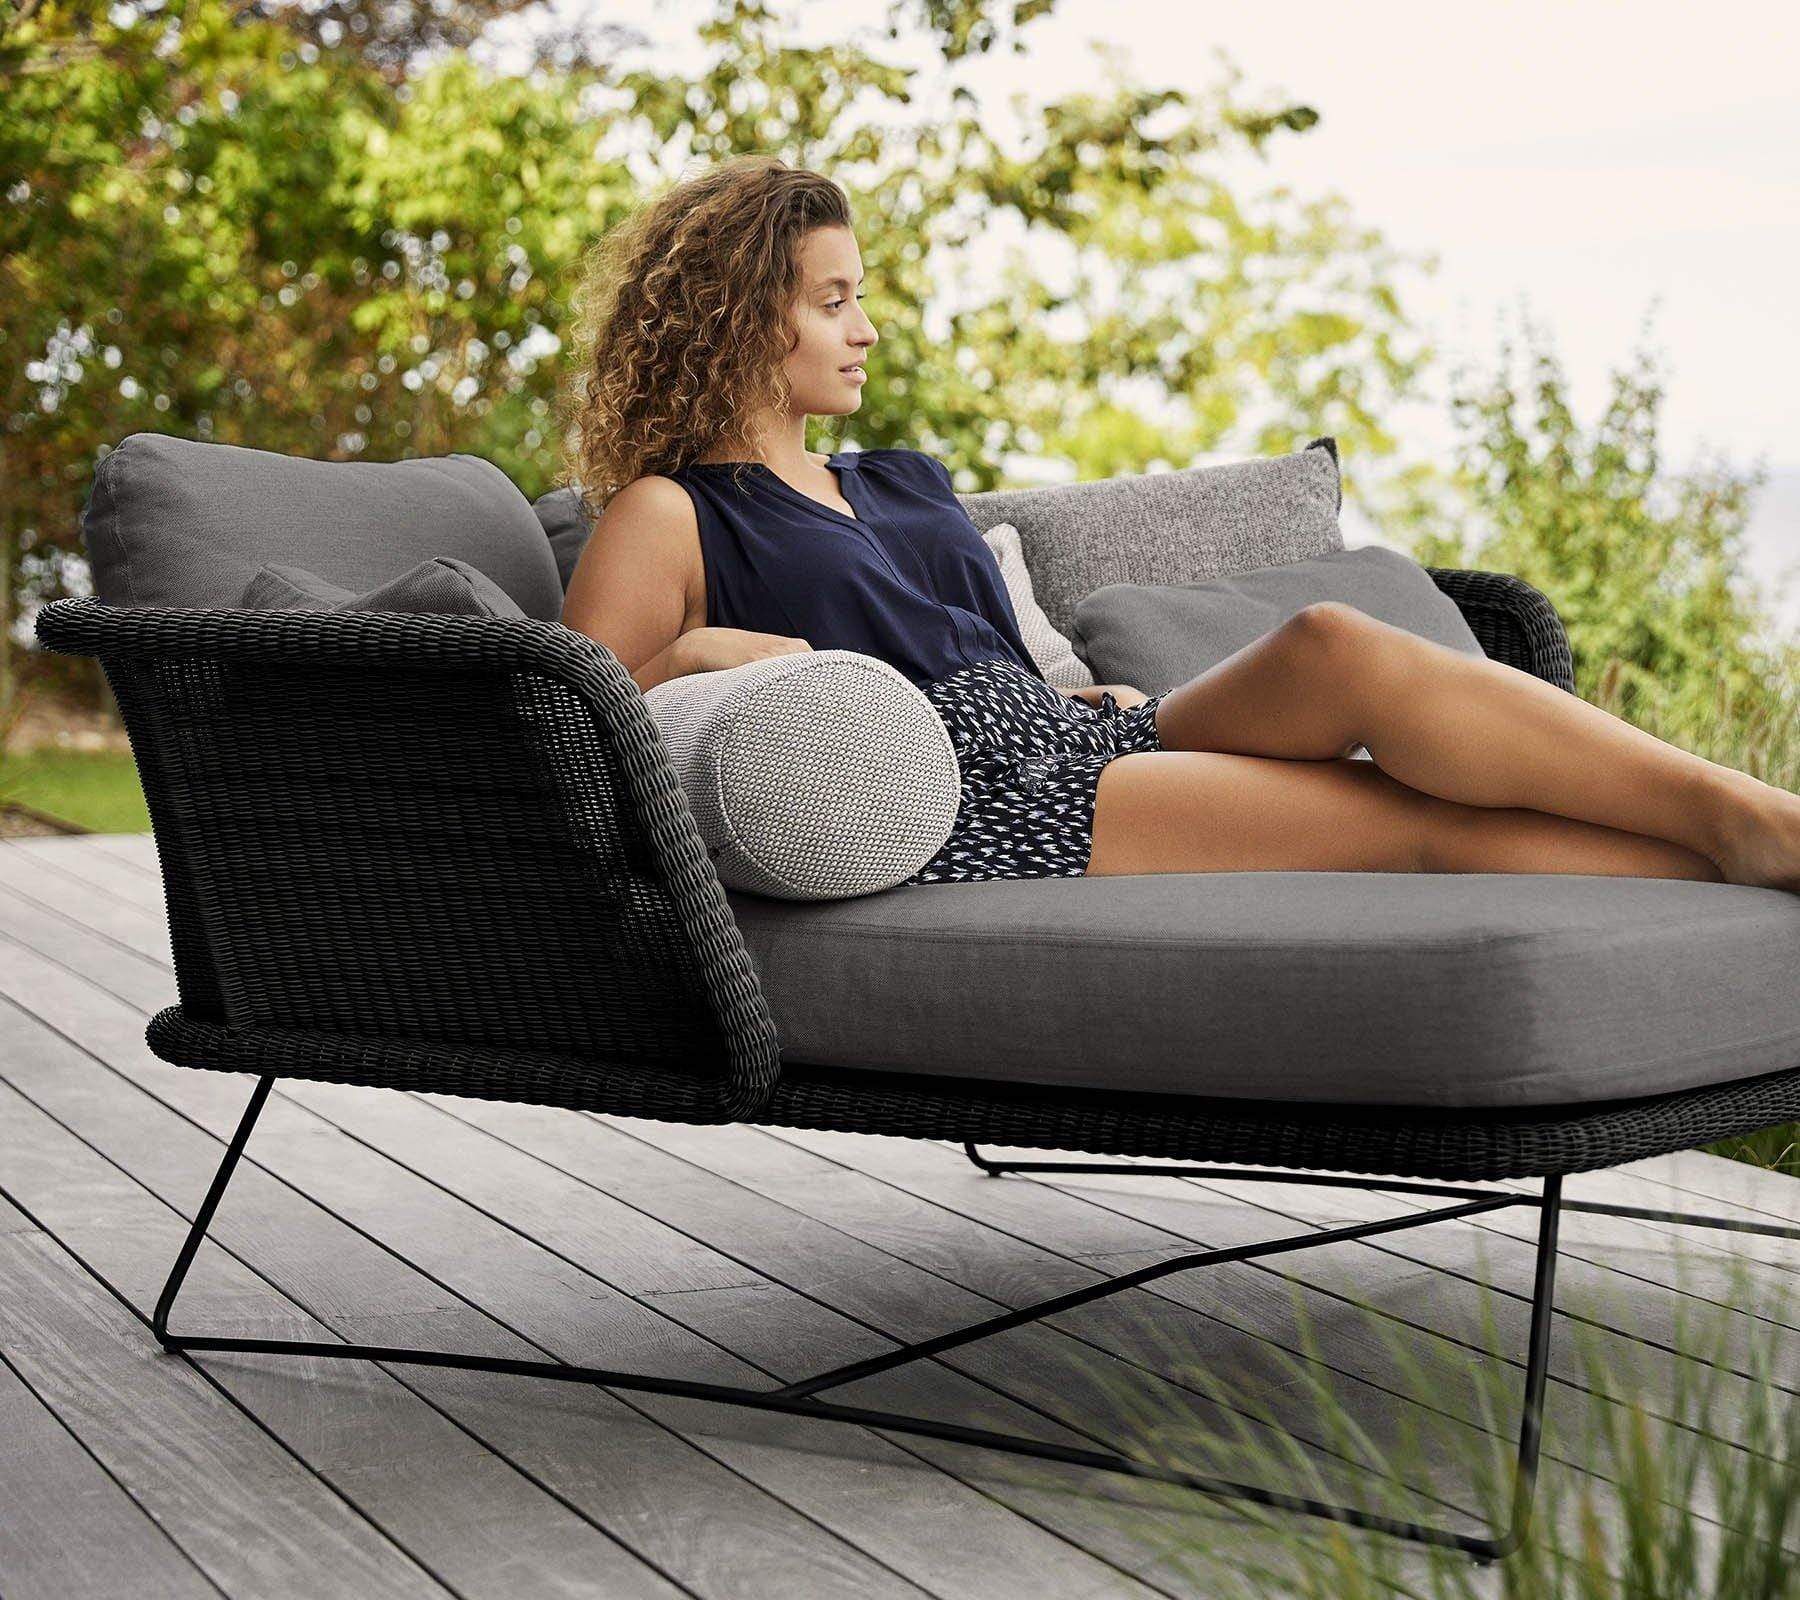 Cane-Line Denmark Outdoor Daybed Horizon daybed, incl. Cane-line Natté cushions, Cane-line Weave